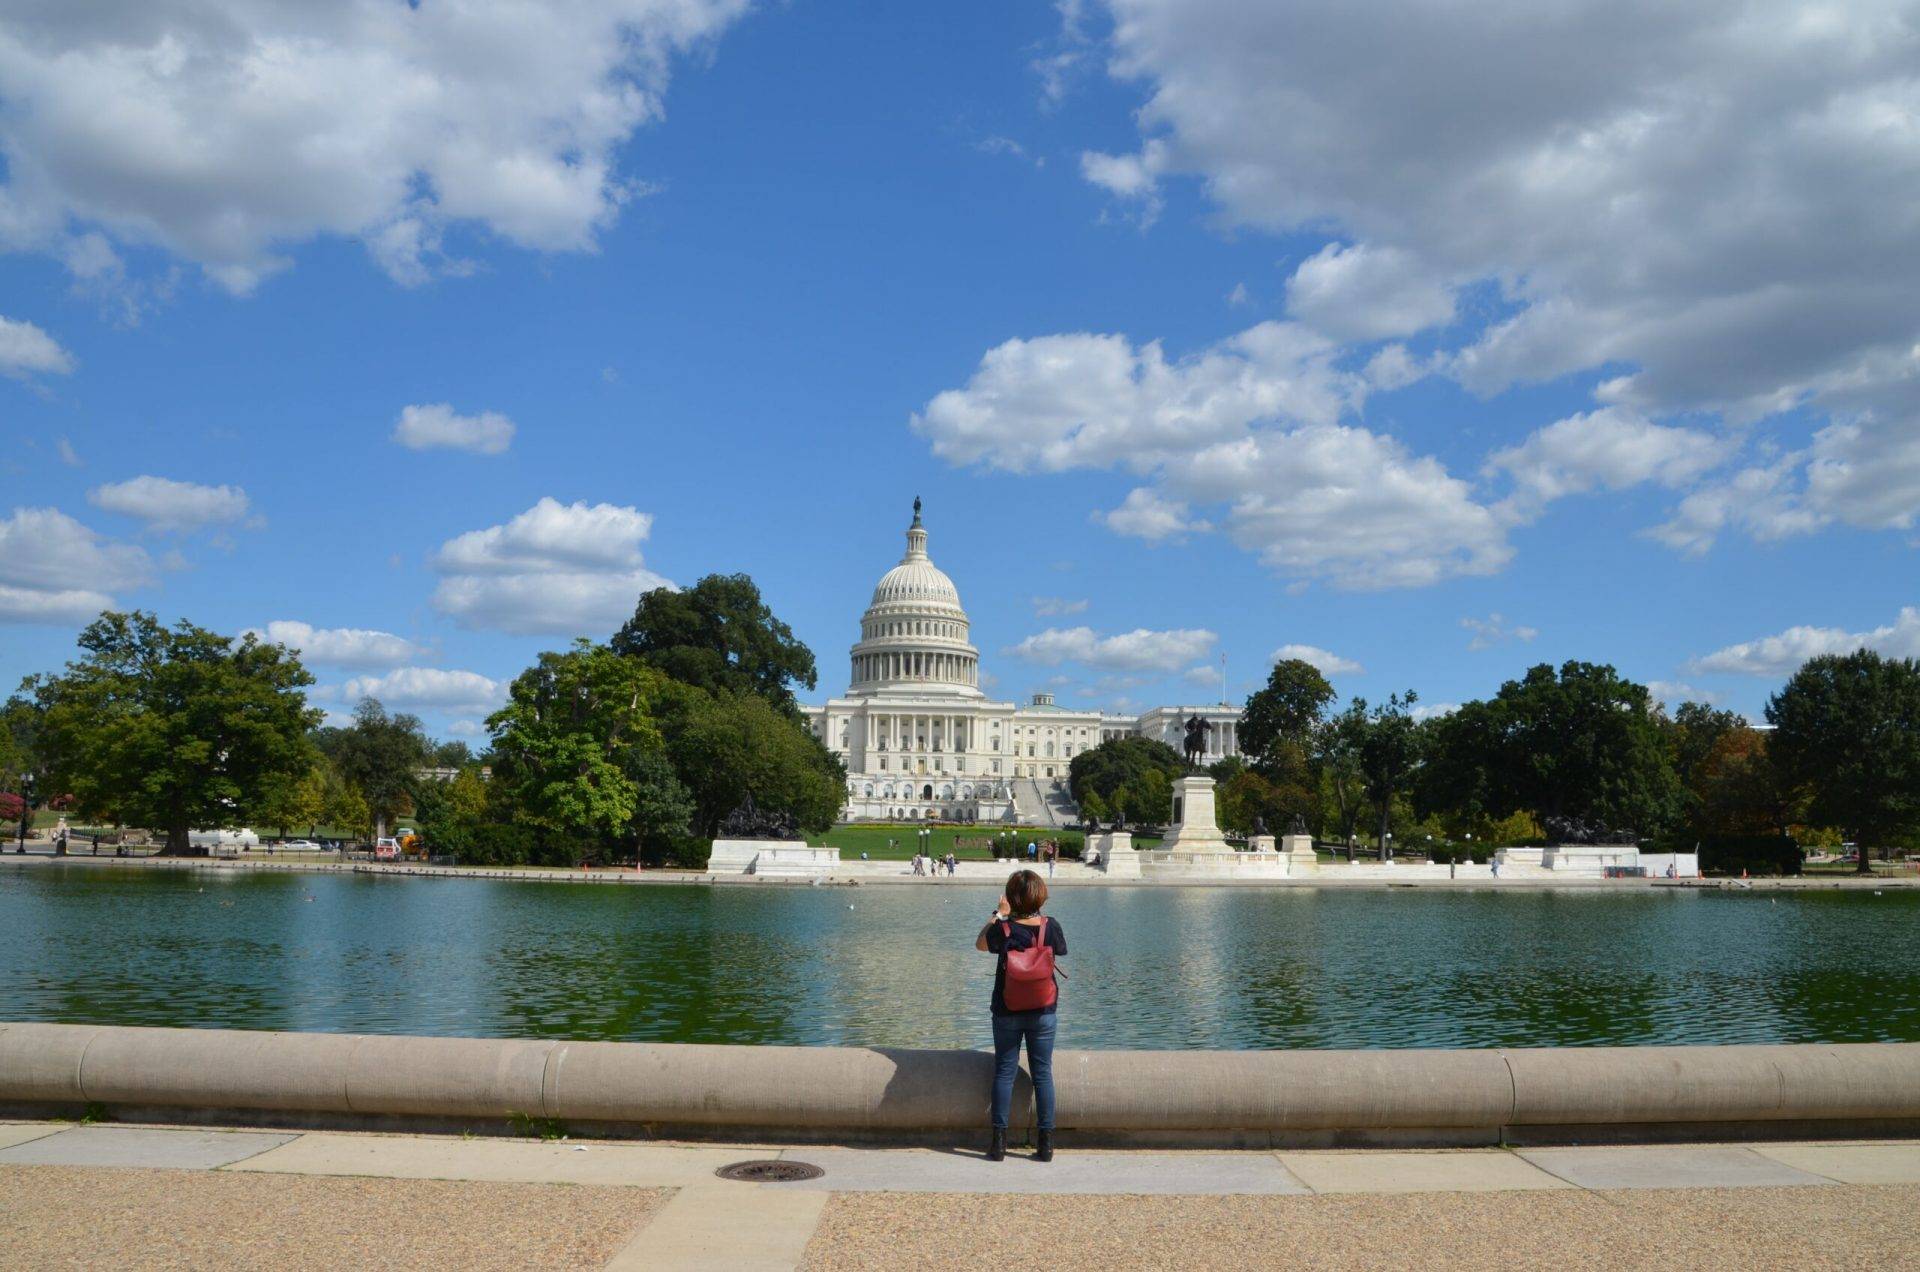 Student taking a picture of the United States Capitol Building in Washington, DC on a school trip